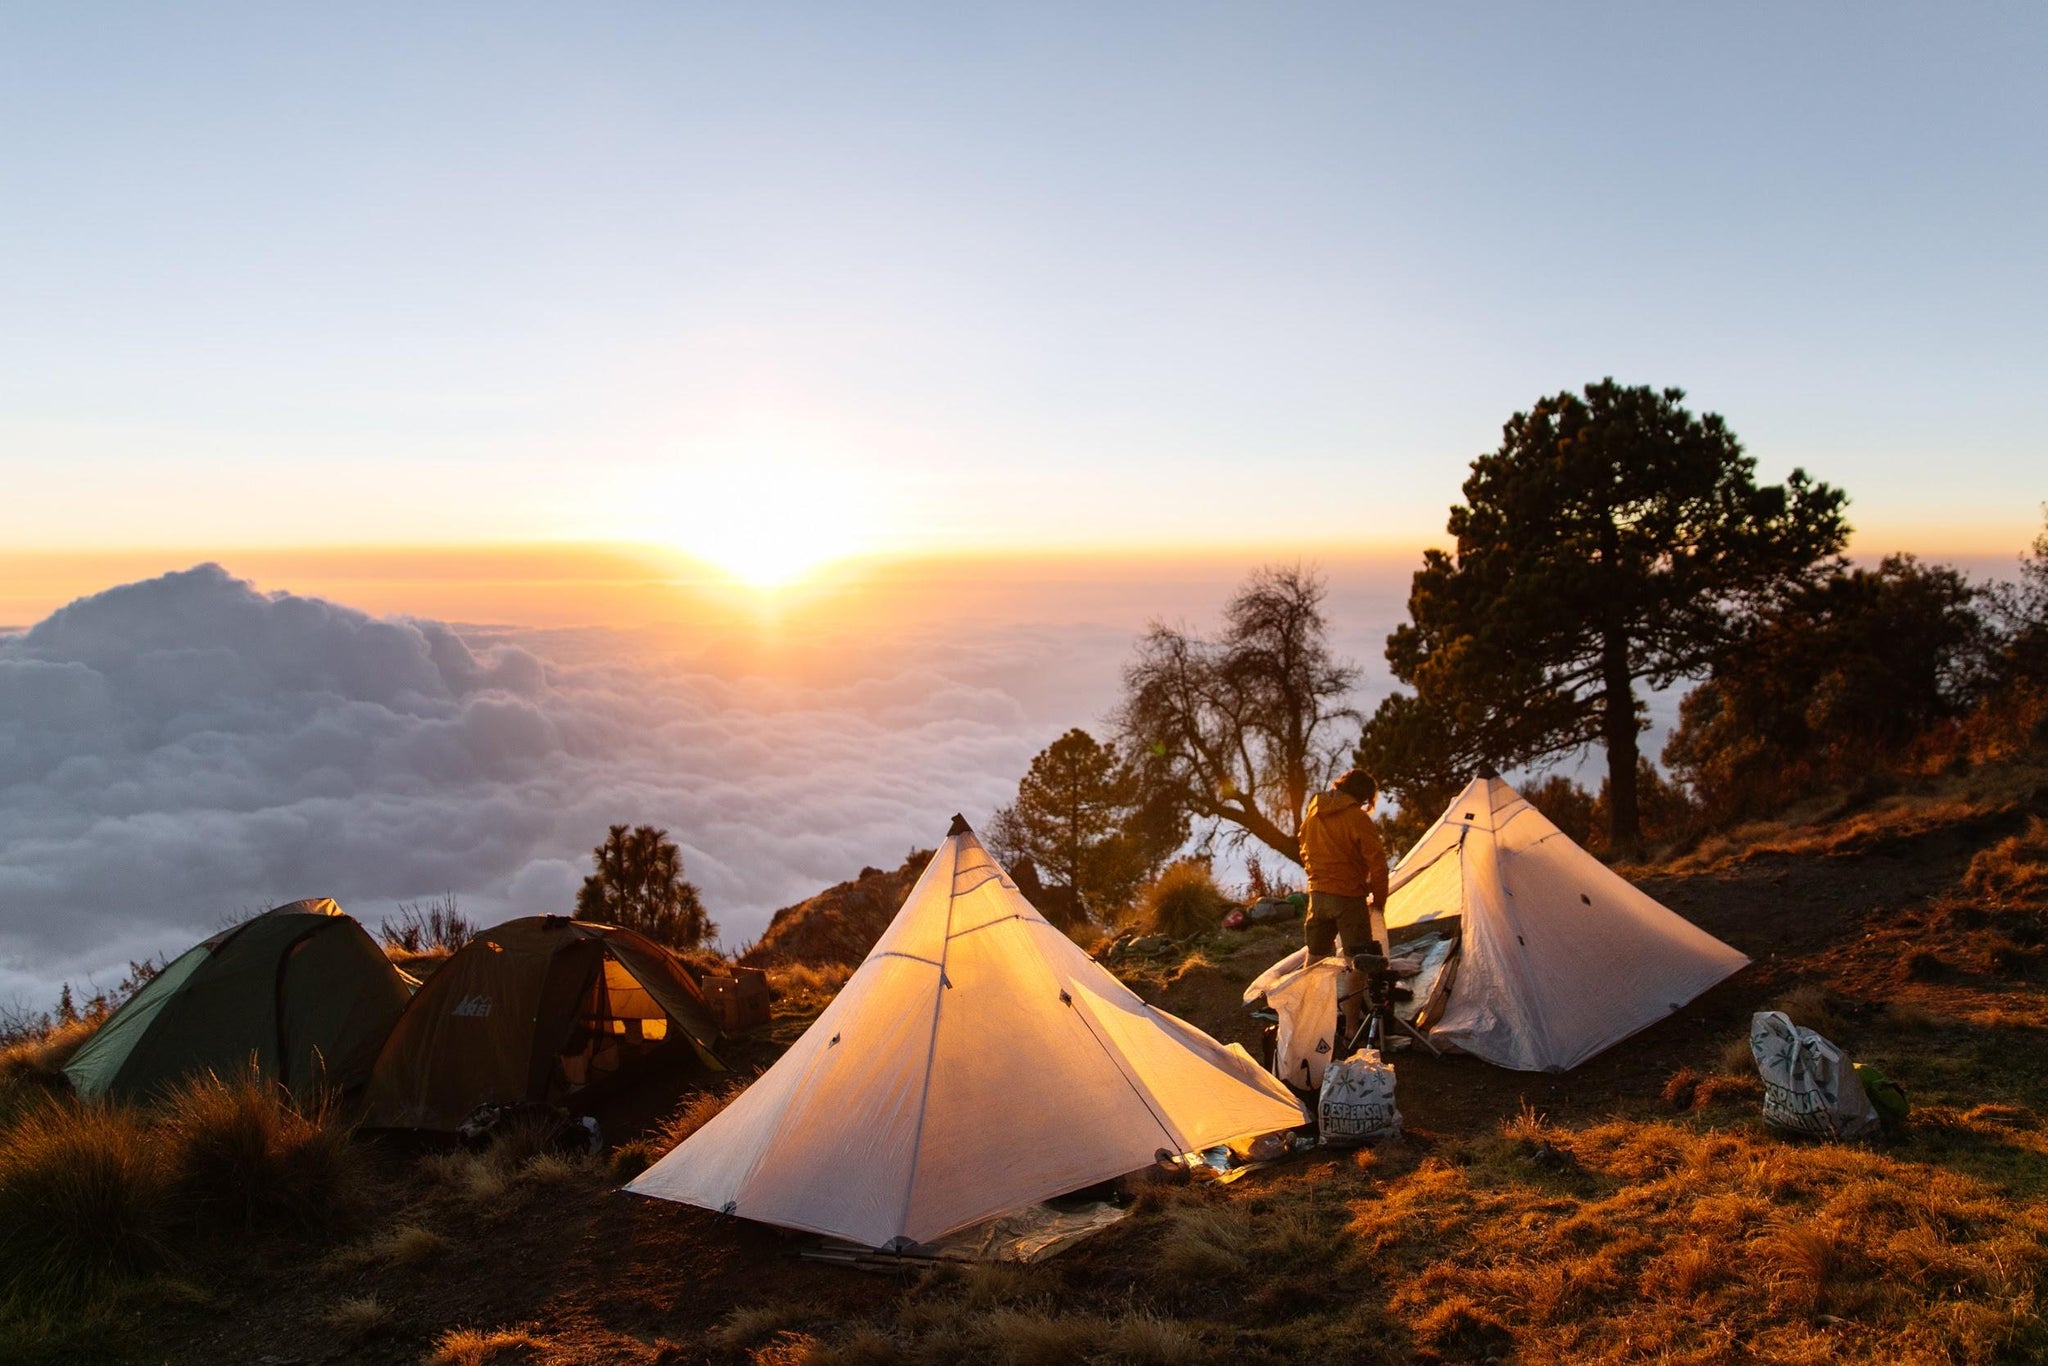 Ultralight tents pitched above the clouds